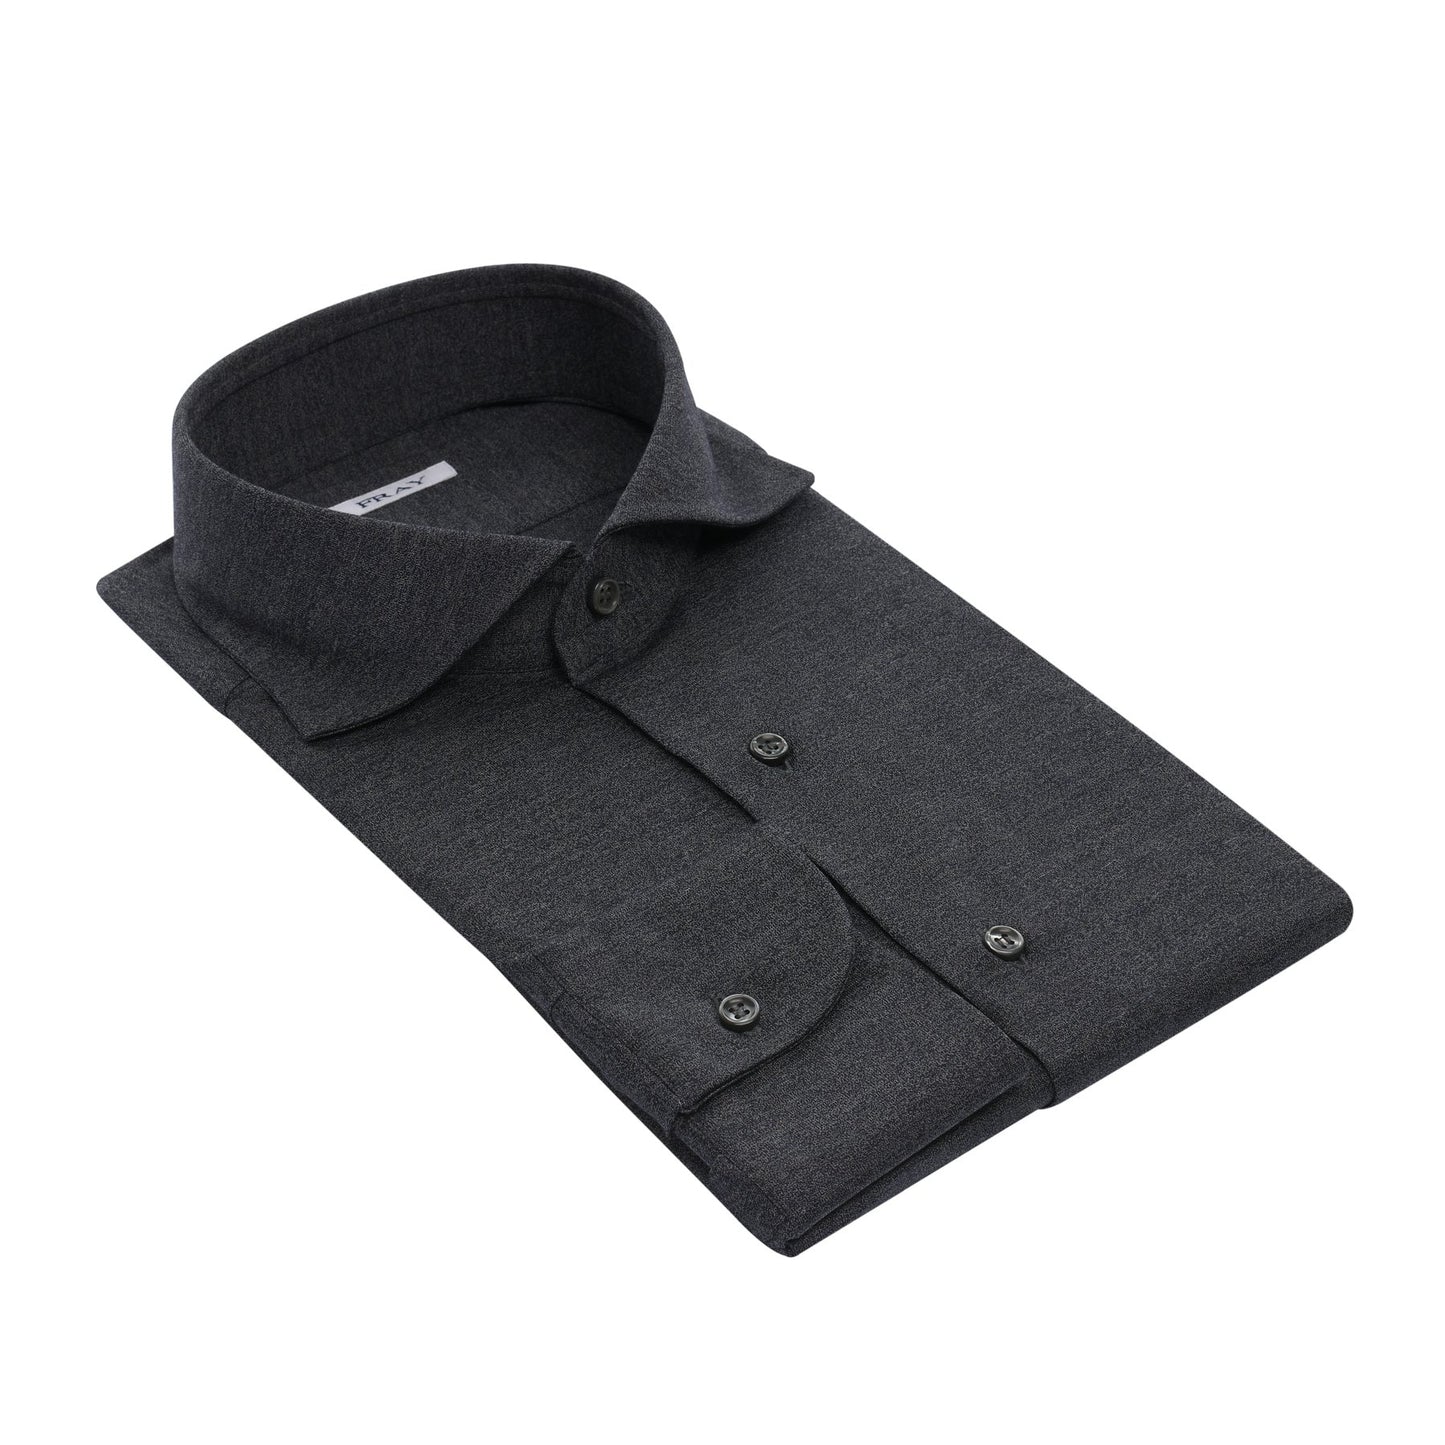 Fray Stretch-Virgin Wool and Silk-Blend Shirt in Anthracite - SARTALE